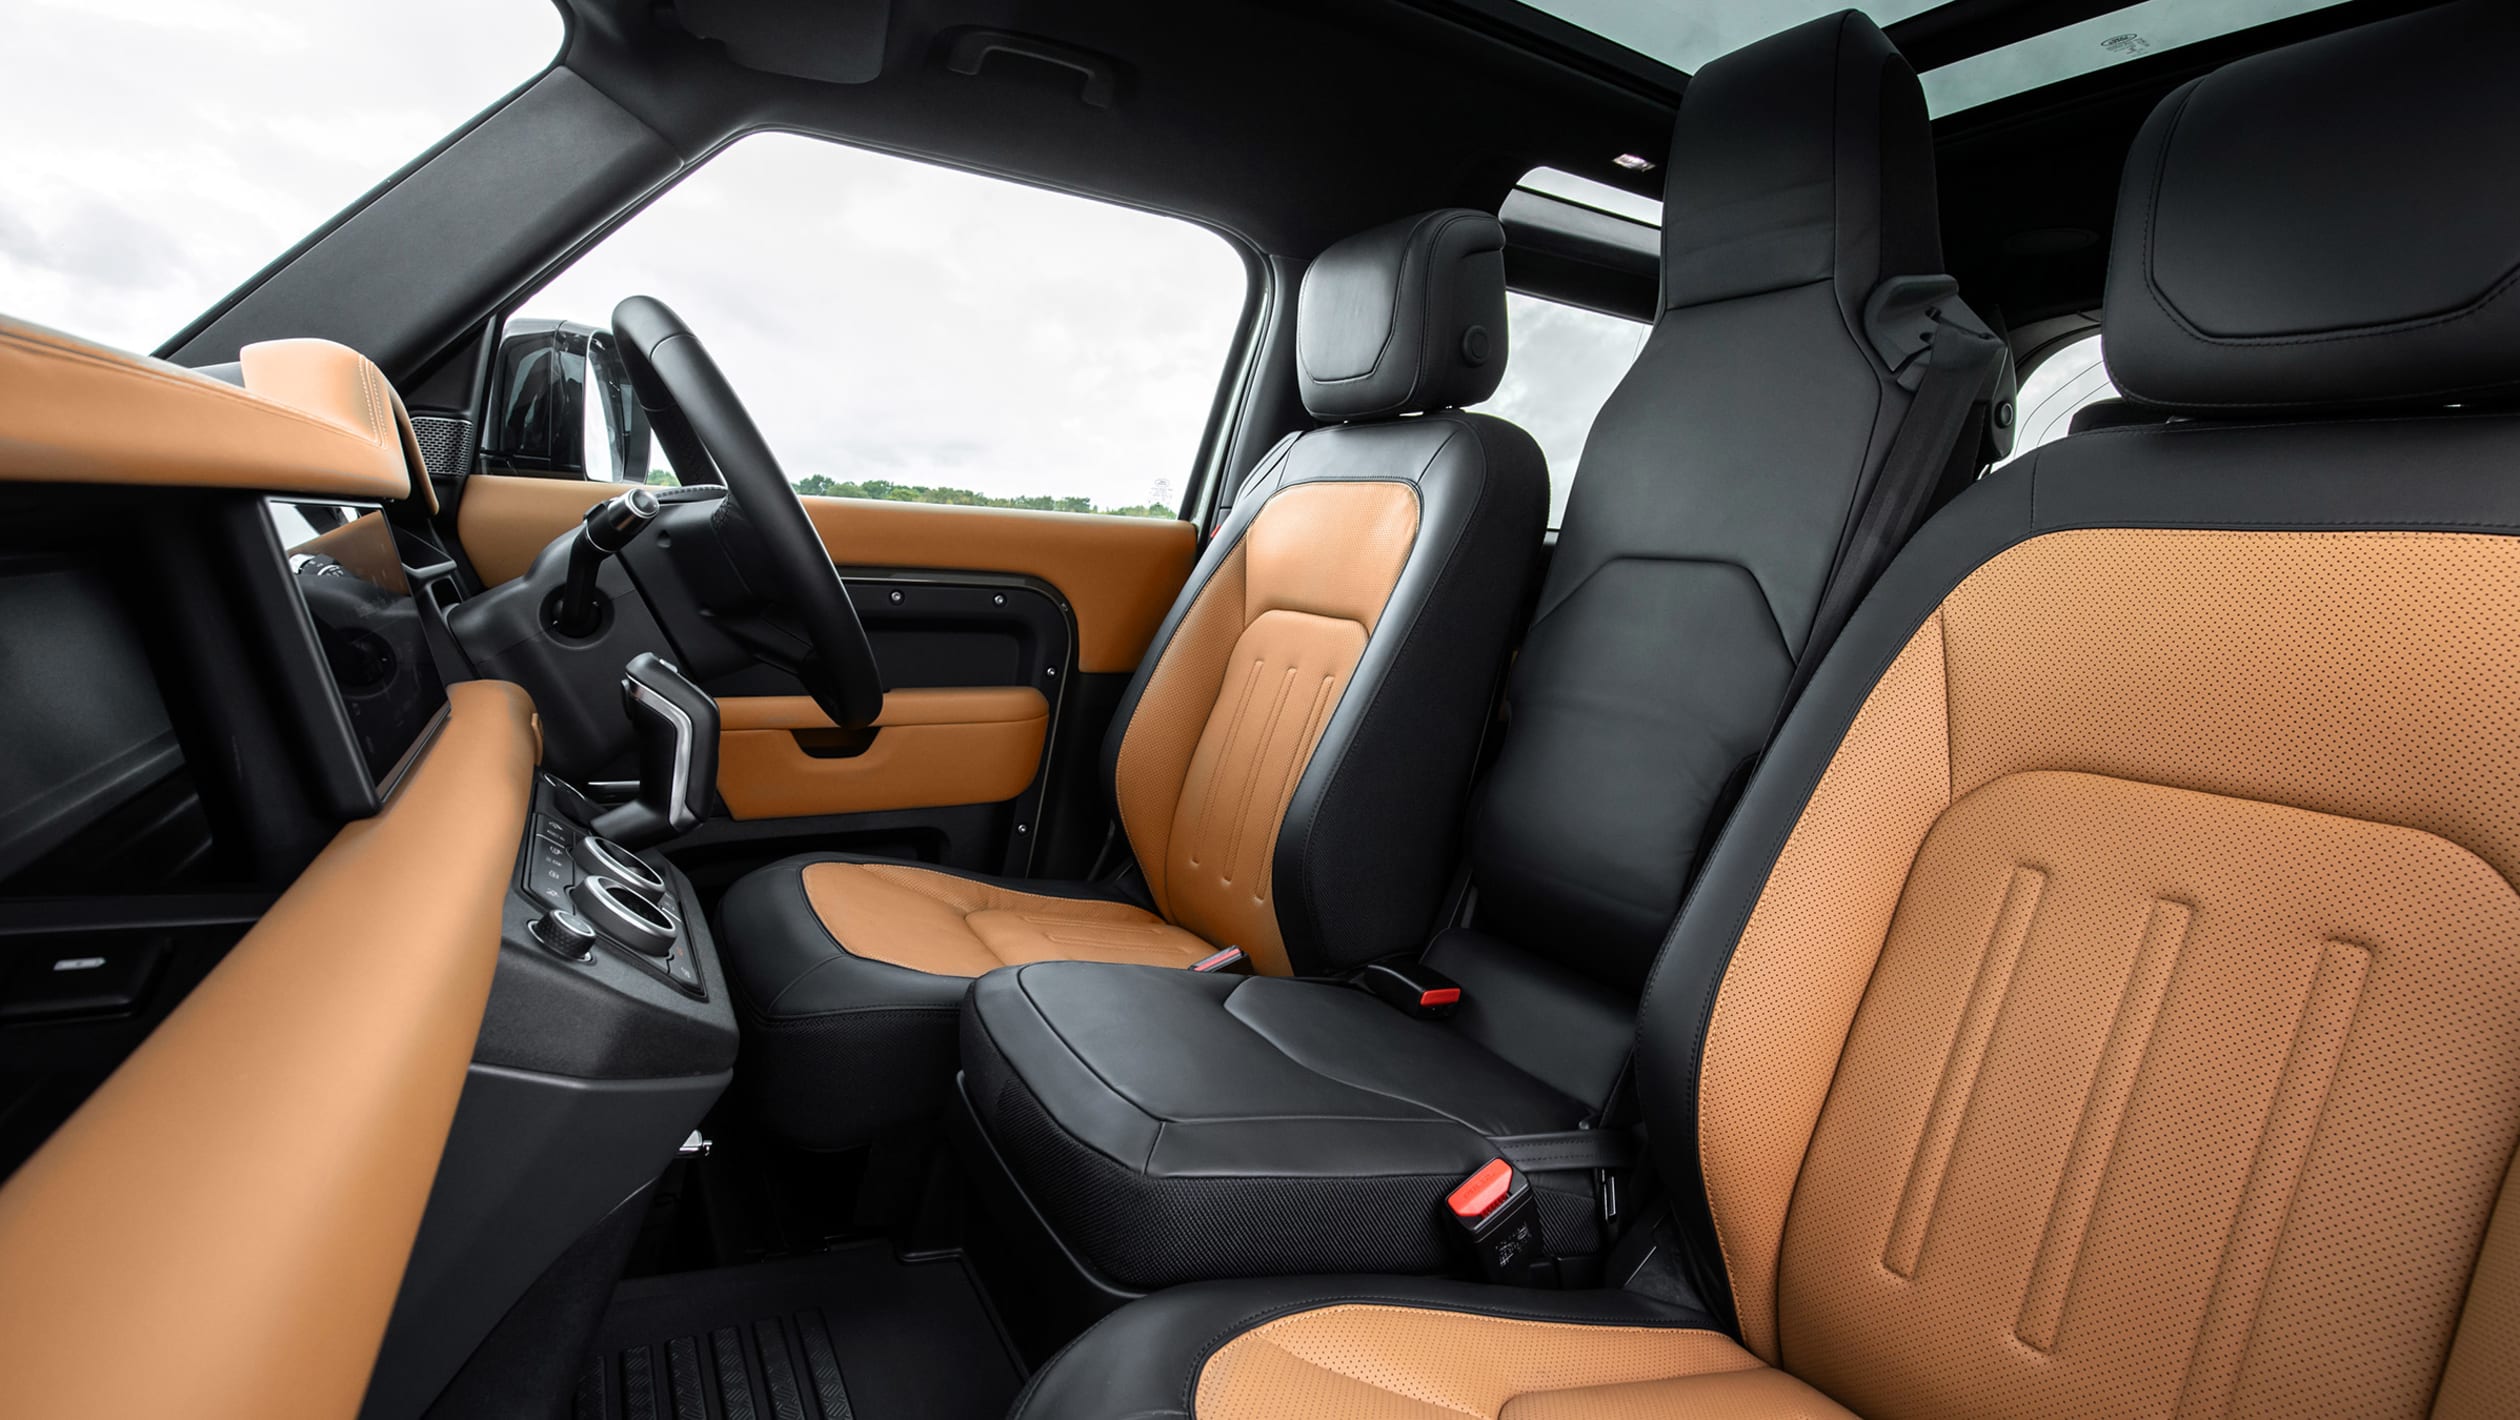 Which Suvs Have Built In Booster Seats